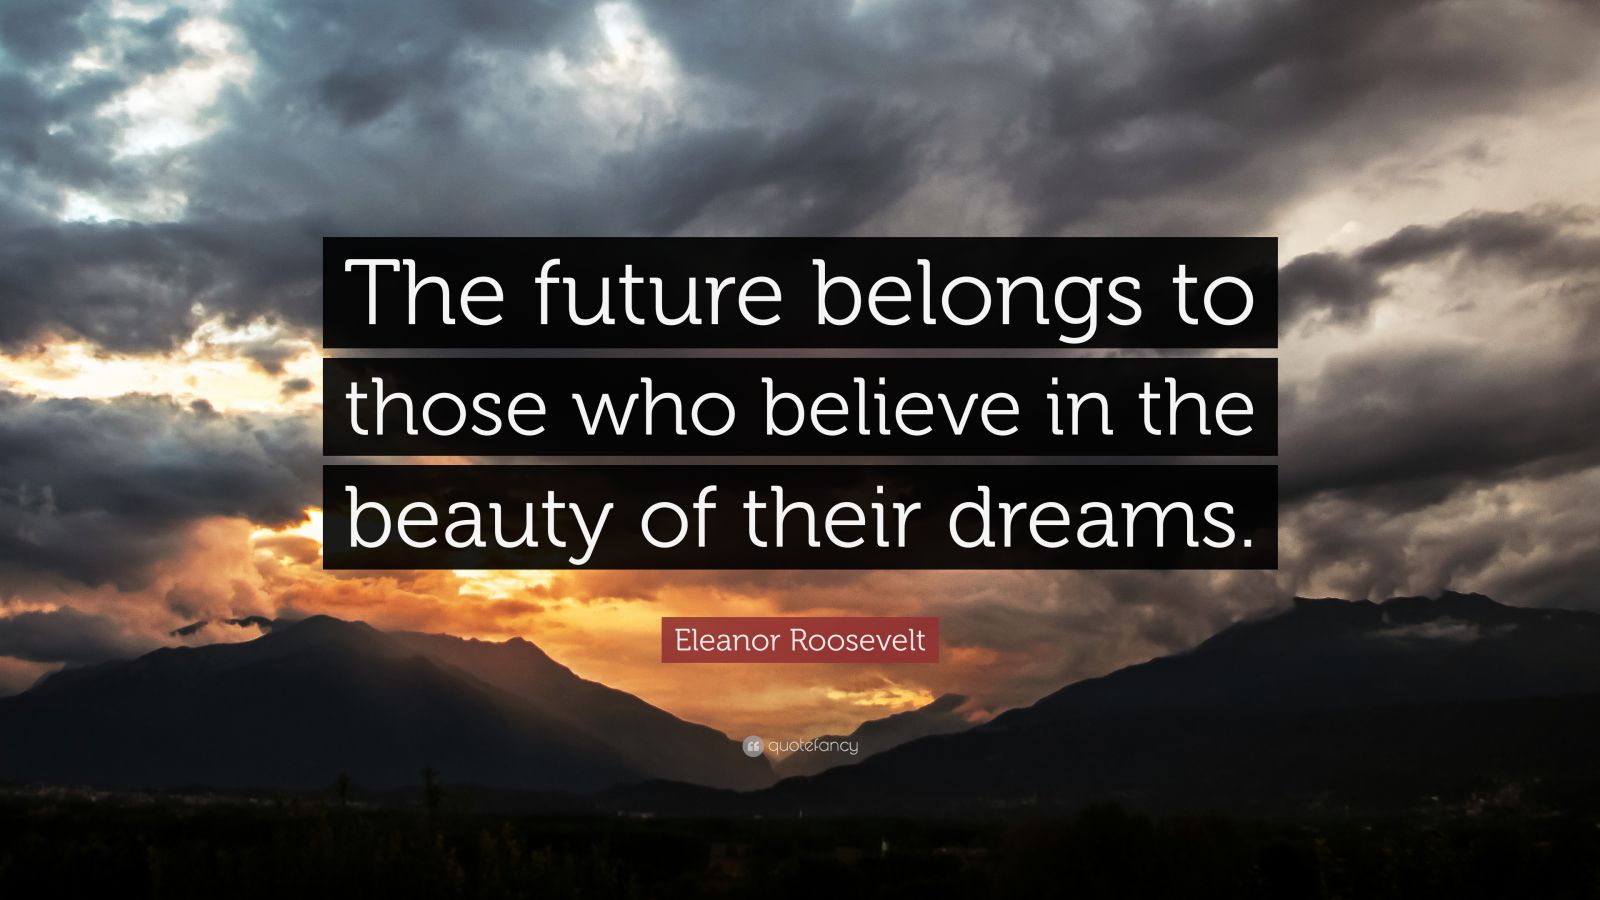 Eleanor Roosevelt Quote: “The future belongs to those who believe in